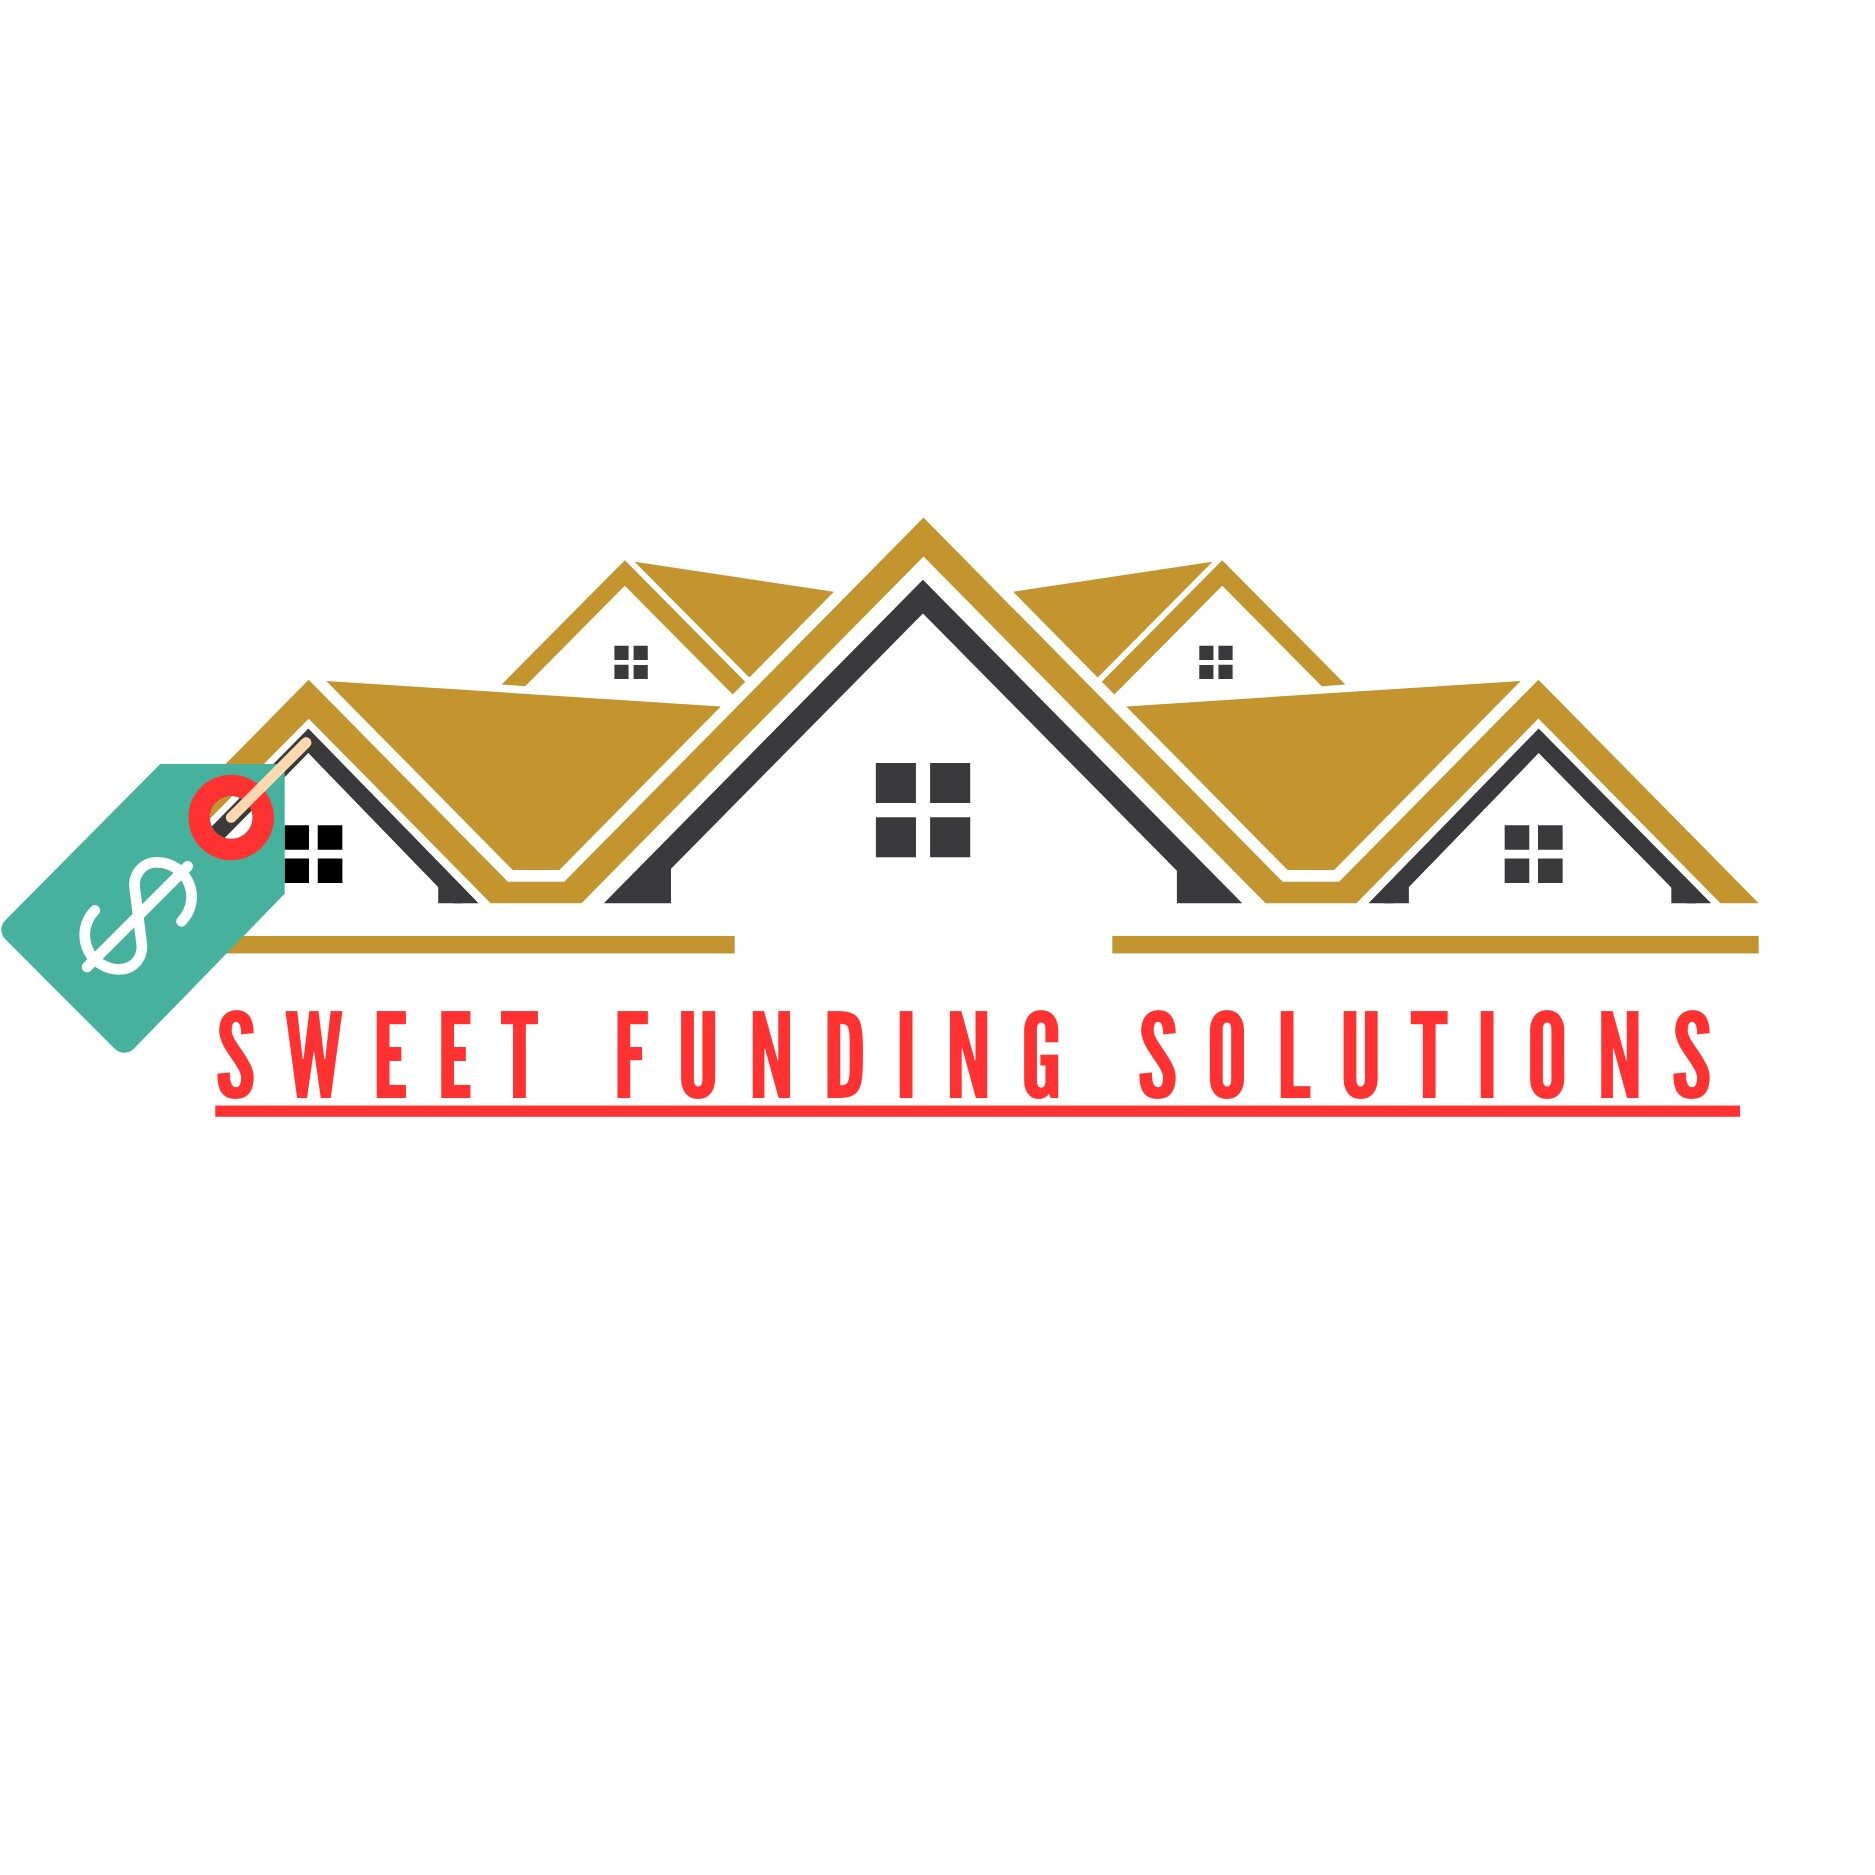 Sweet Funding Solutions